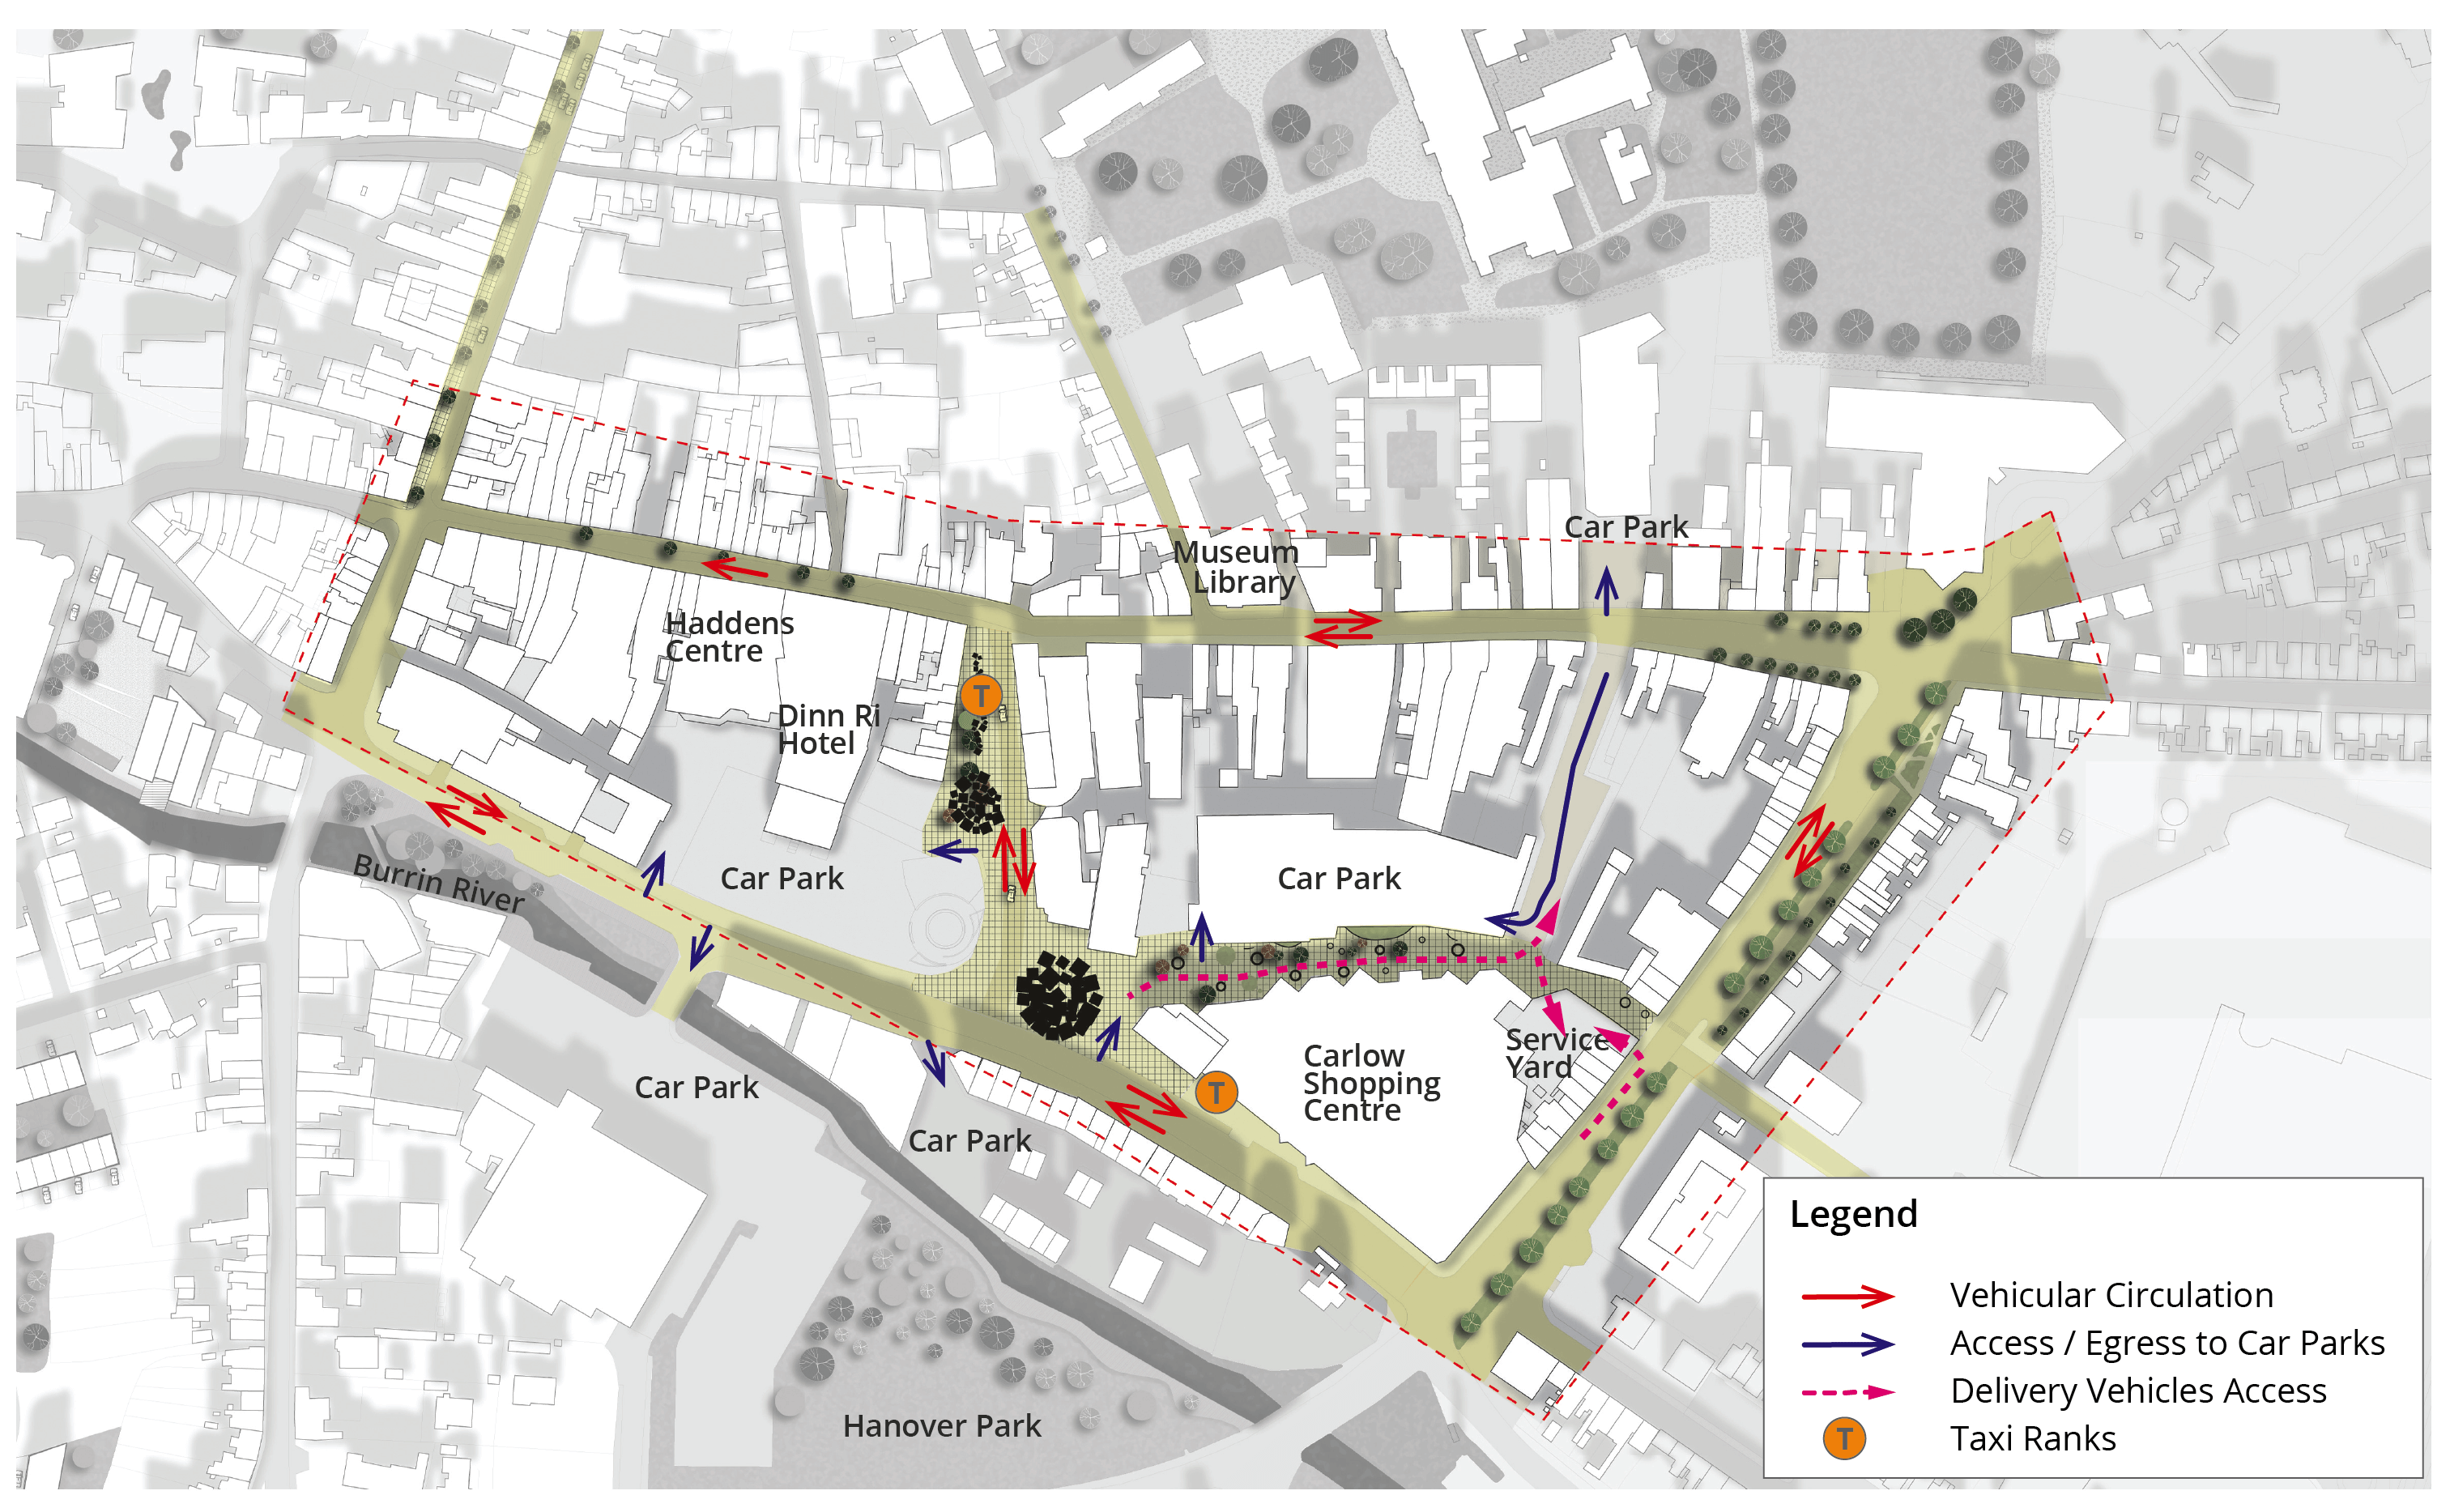 Map of Town Centre showing vehicular circulation; access/egress to car parks; Delivery vehicle access; and taxi ranks